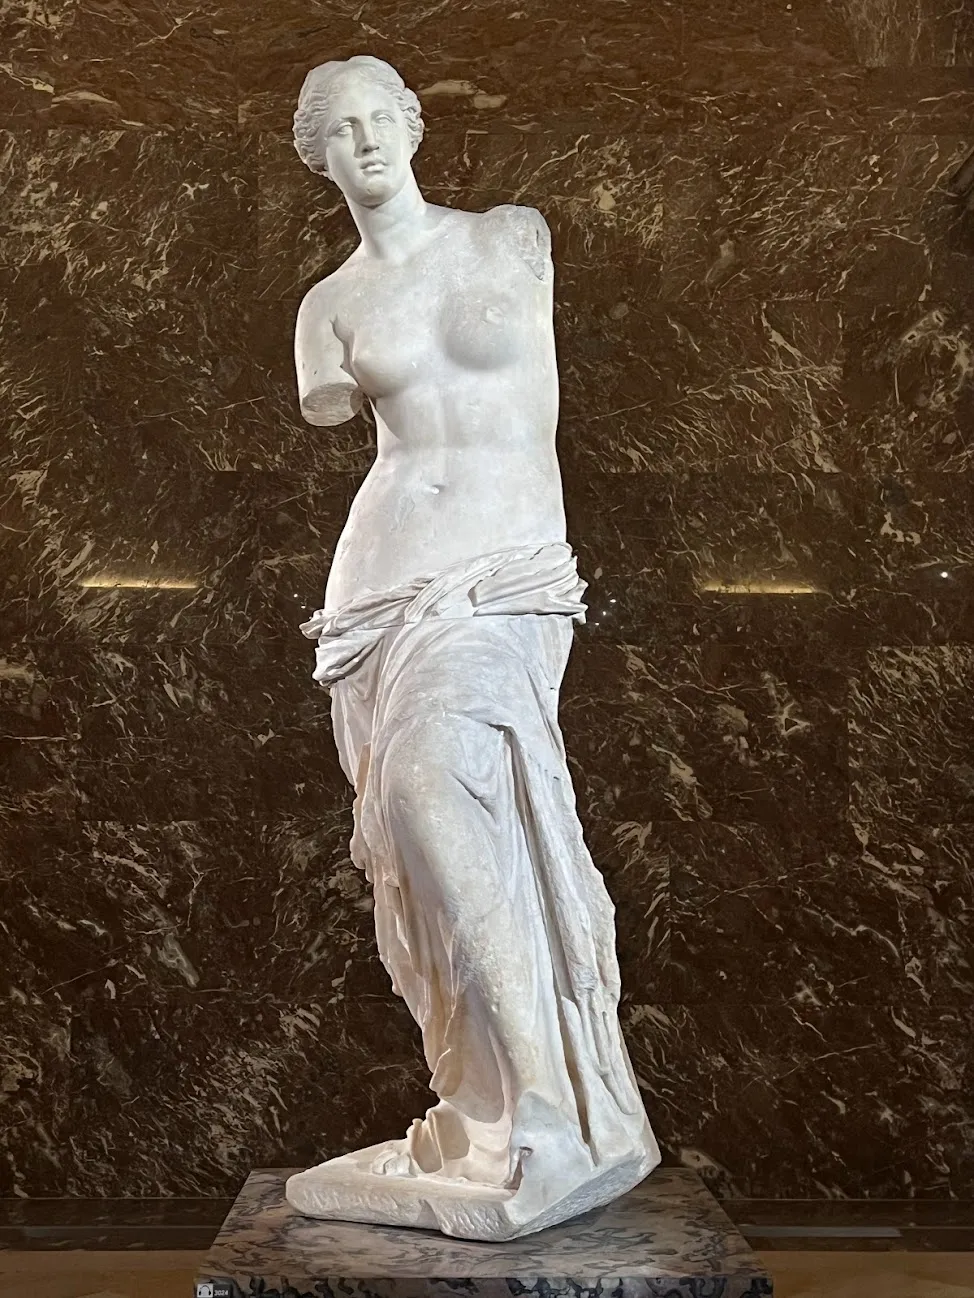 Marble sculpture of a topless woman without arms